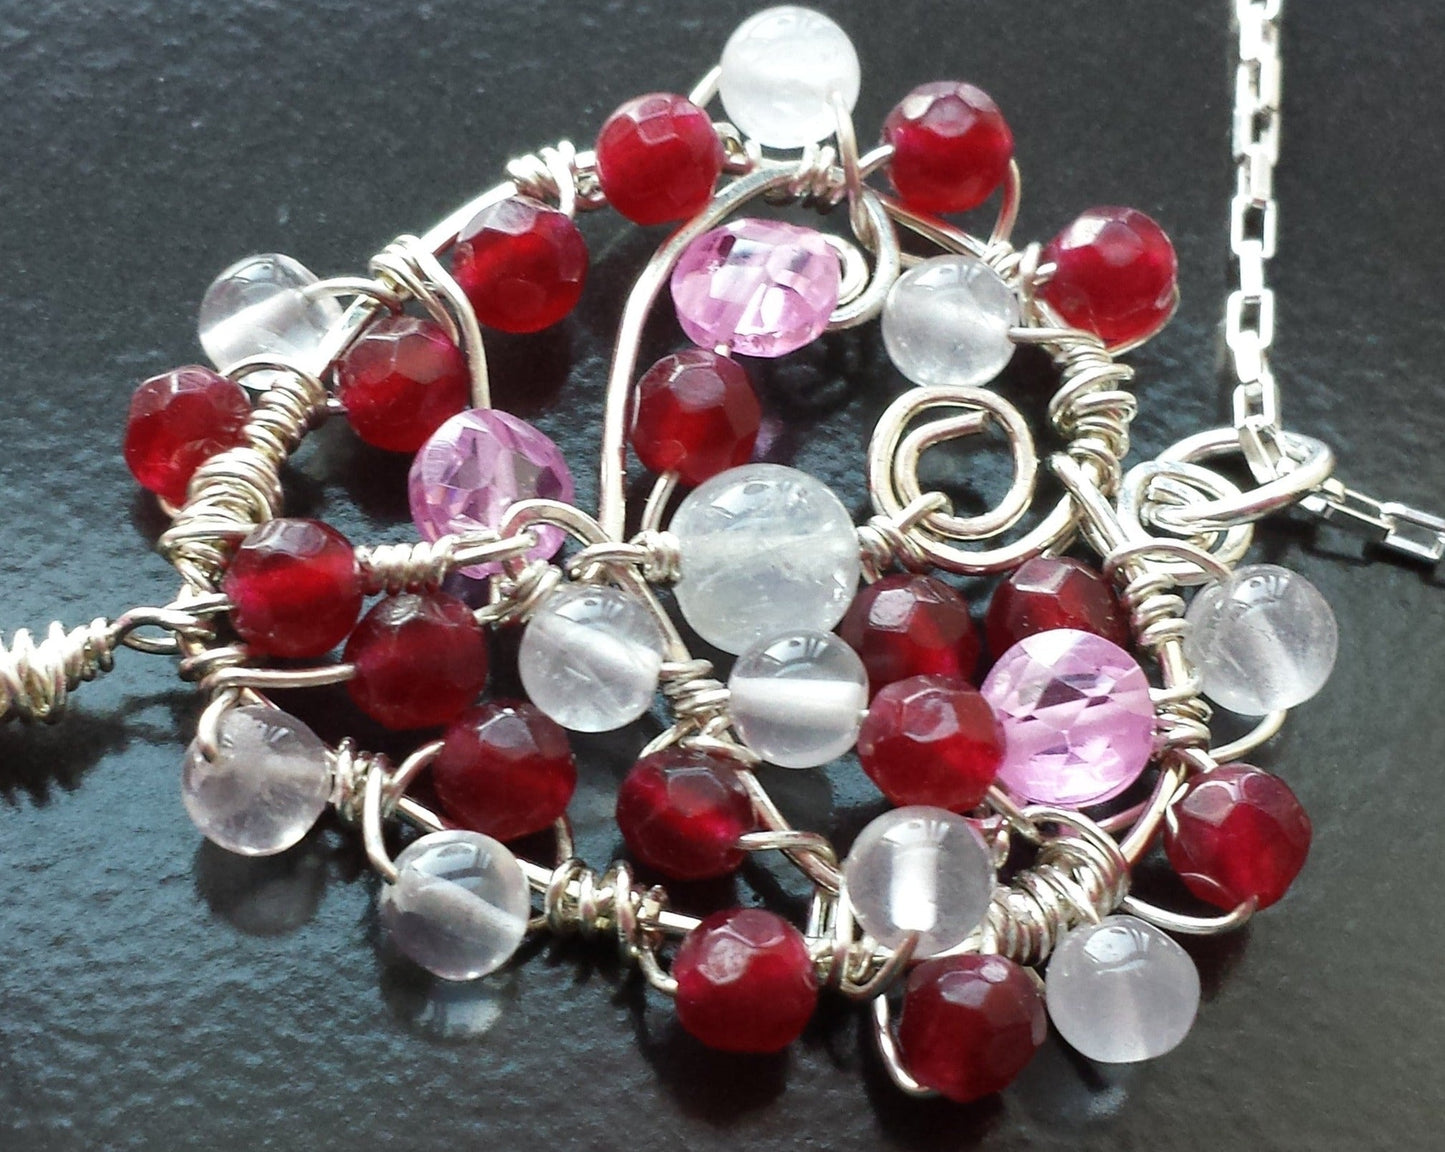 Heart of Gems Pendant Necklace, One of a Kind, Sterling Silver Mulit Gemstone Wire Work Pendant, Reds & Pinks, Moonstone, Jade